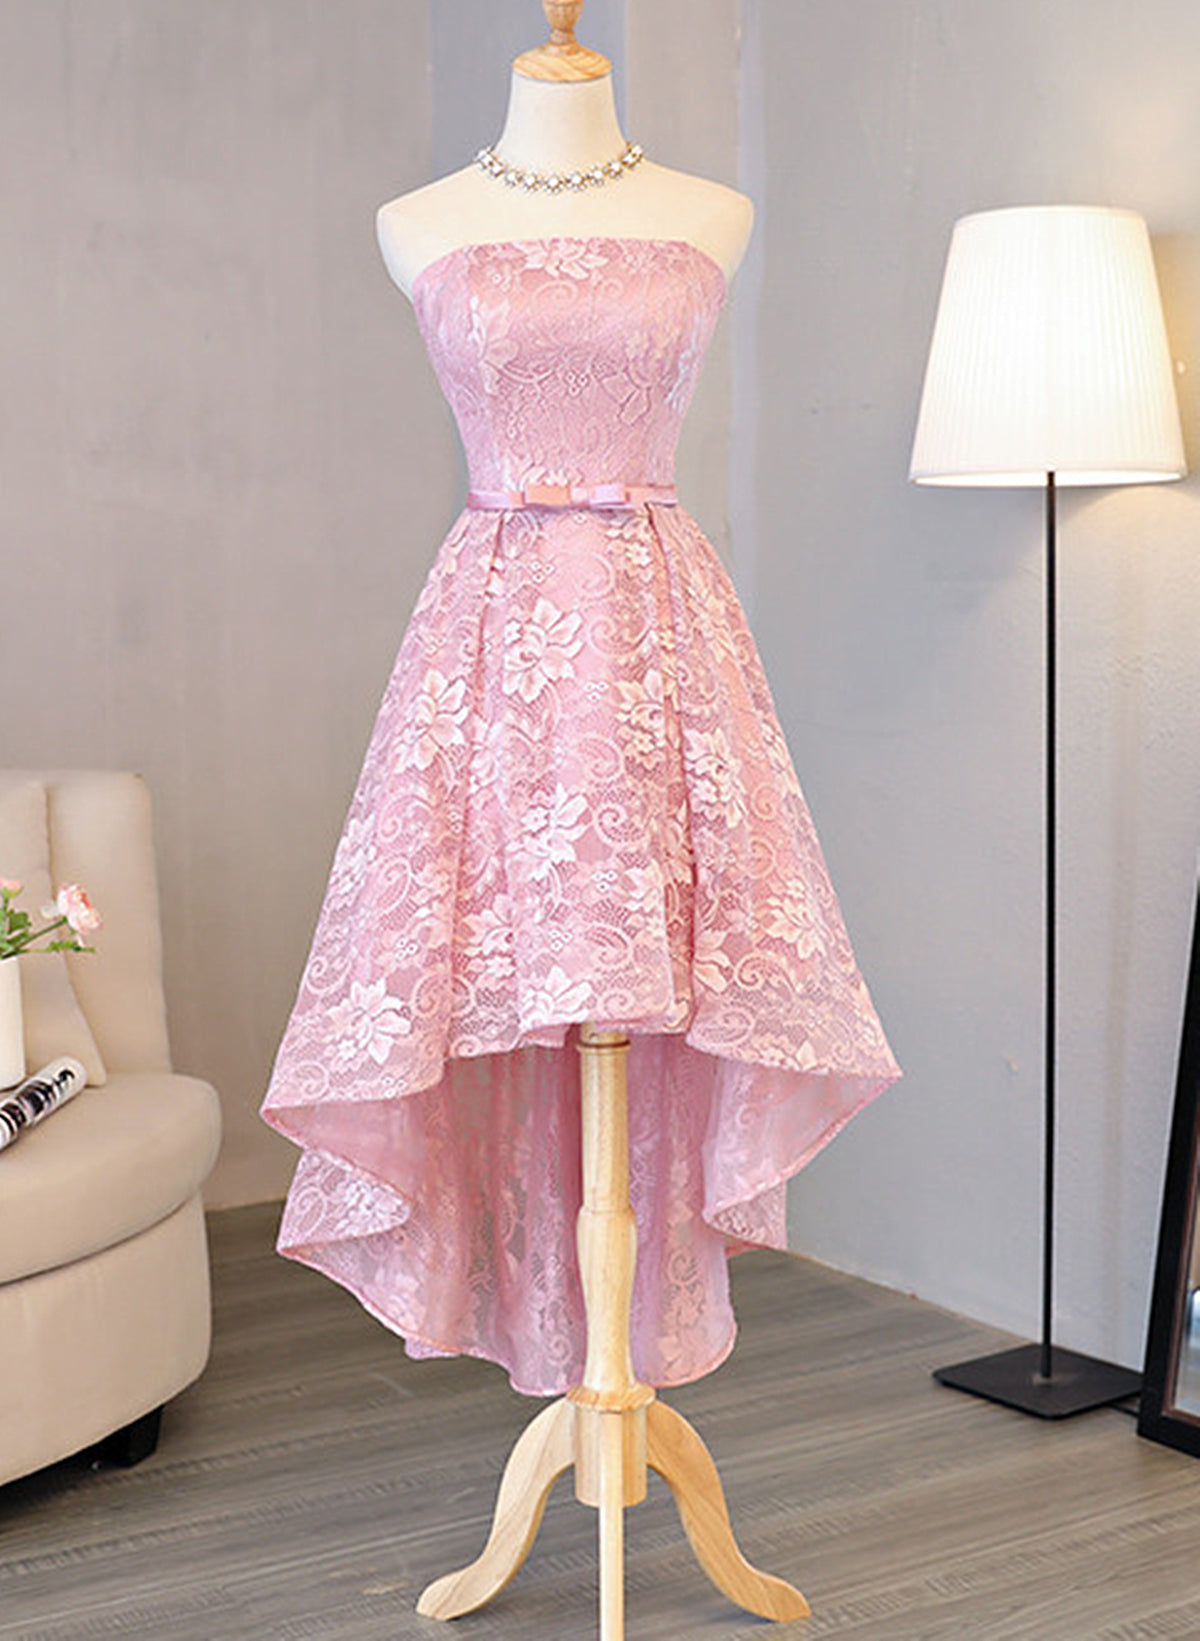 Bridesmaids Dress Designs, Cute Pink High Low Lace Scoop Homecoming Dress, Pink Short Prom Dress